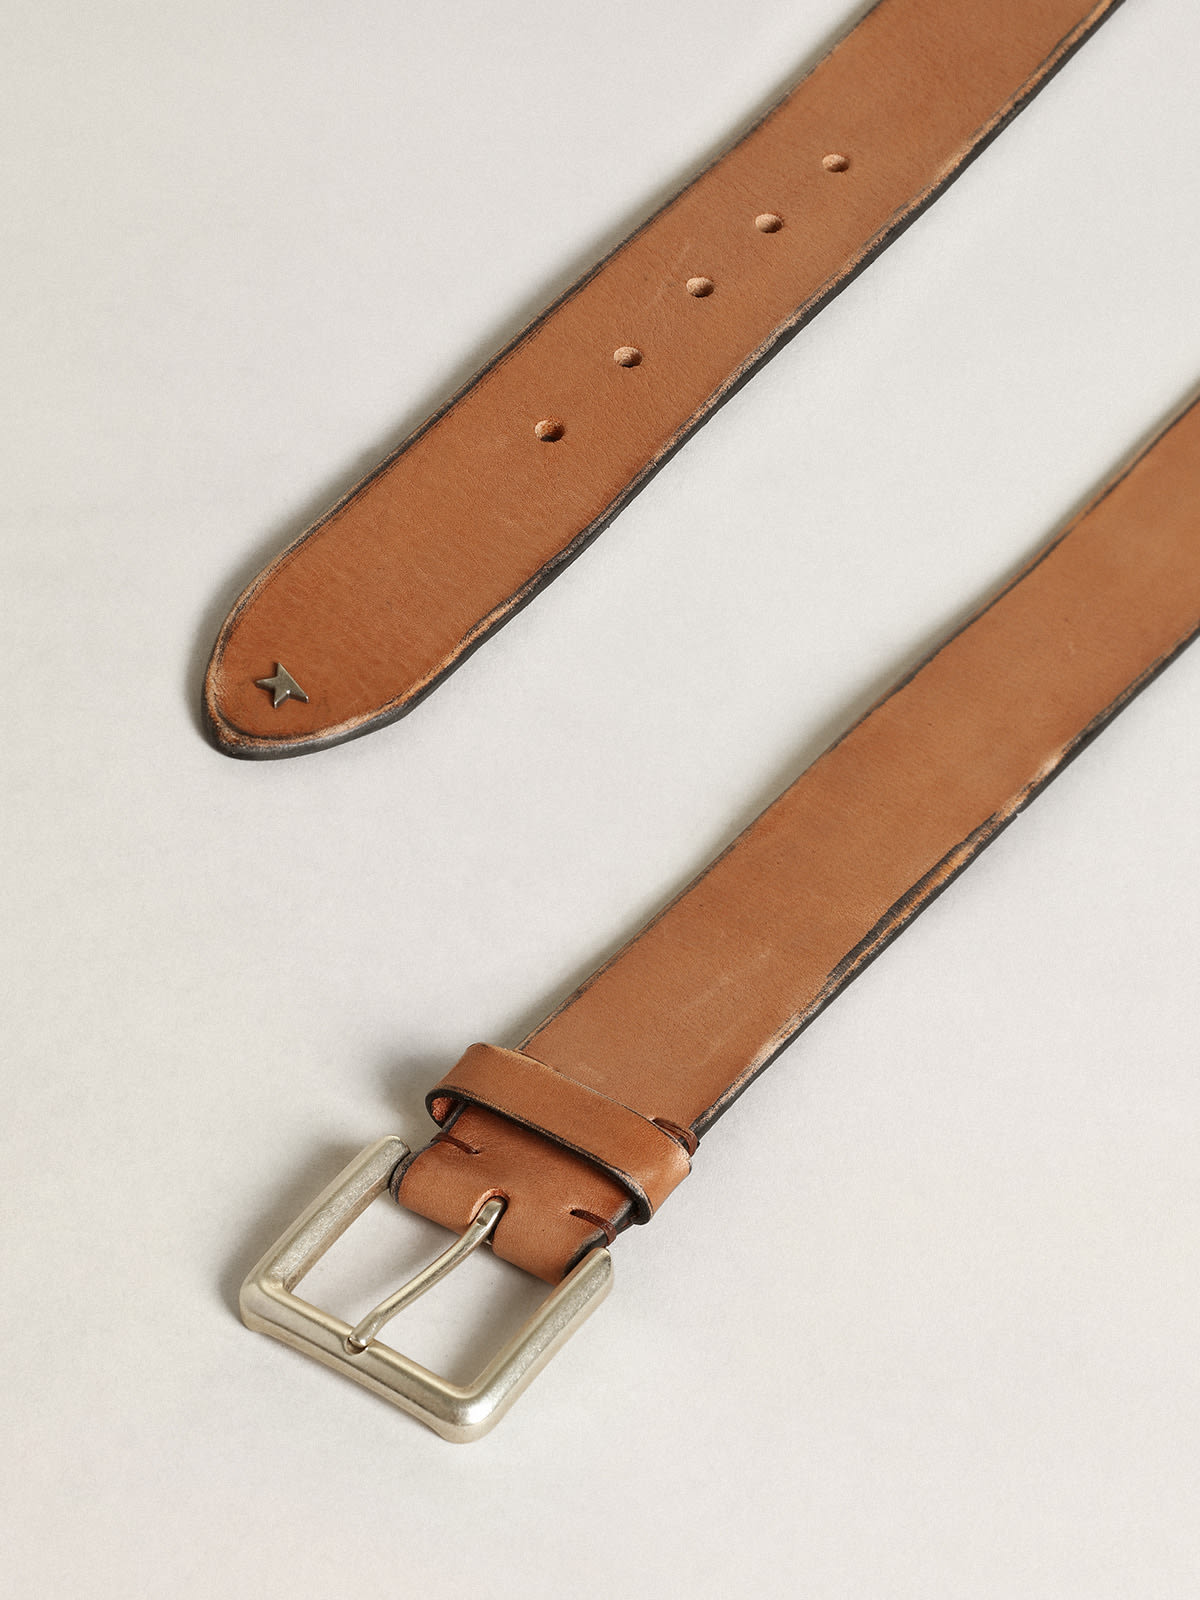 Golden Goose - Belt in tan-colored washed leather in 